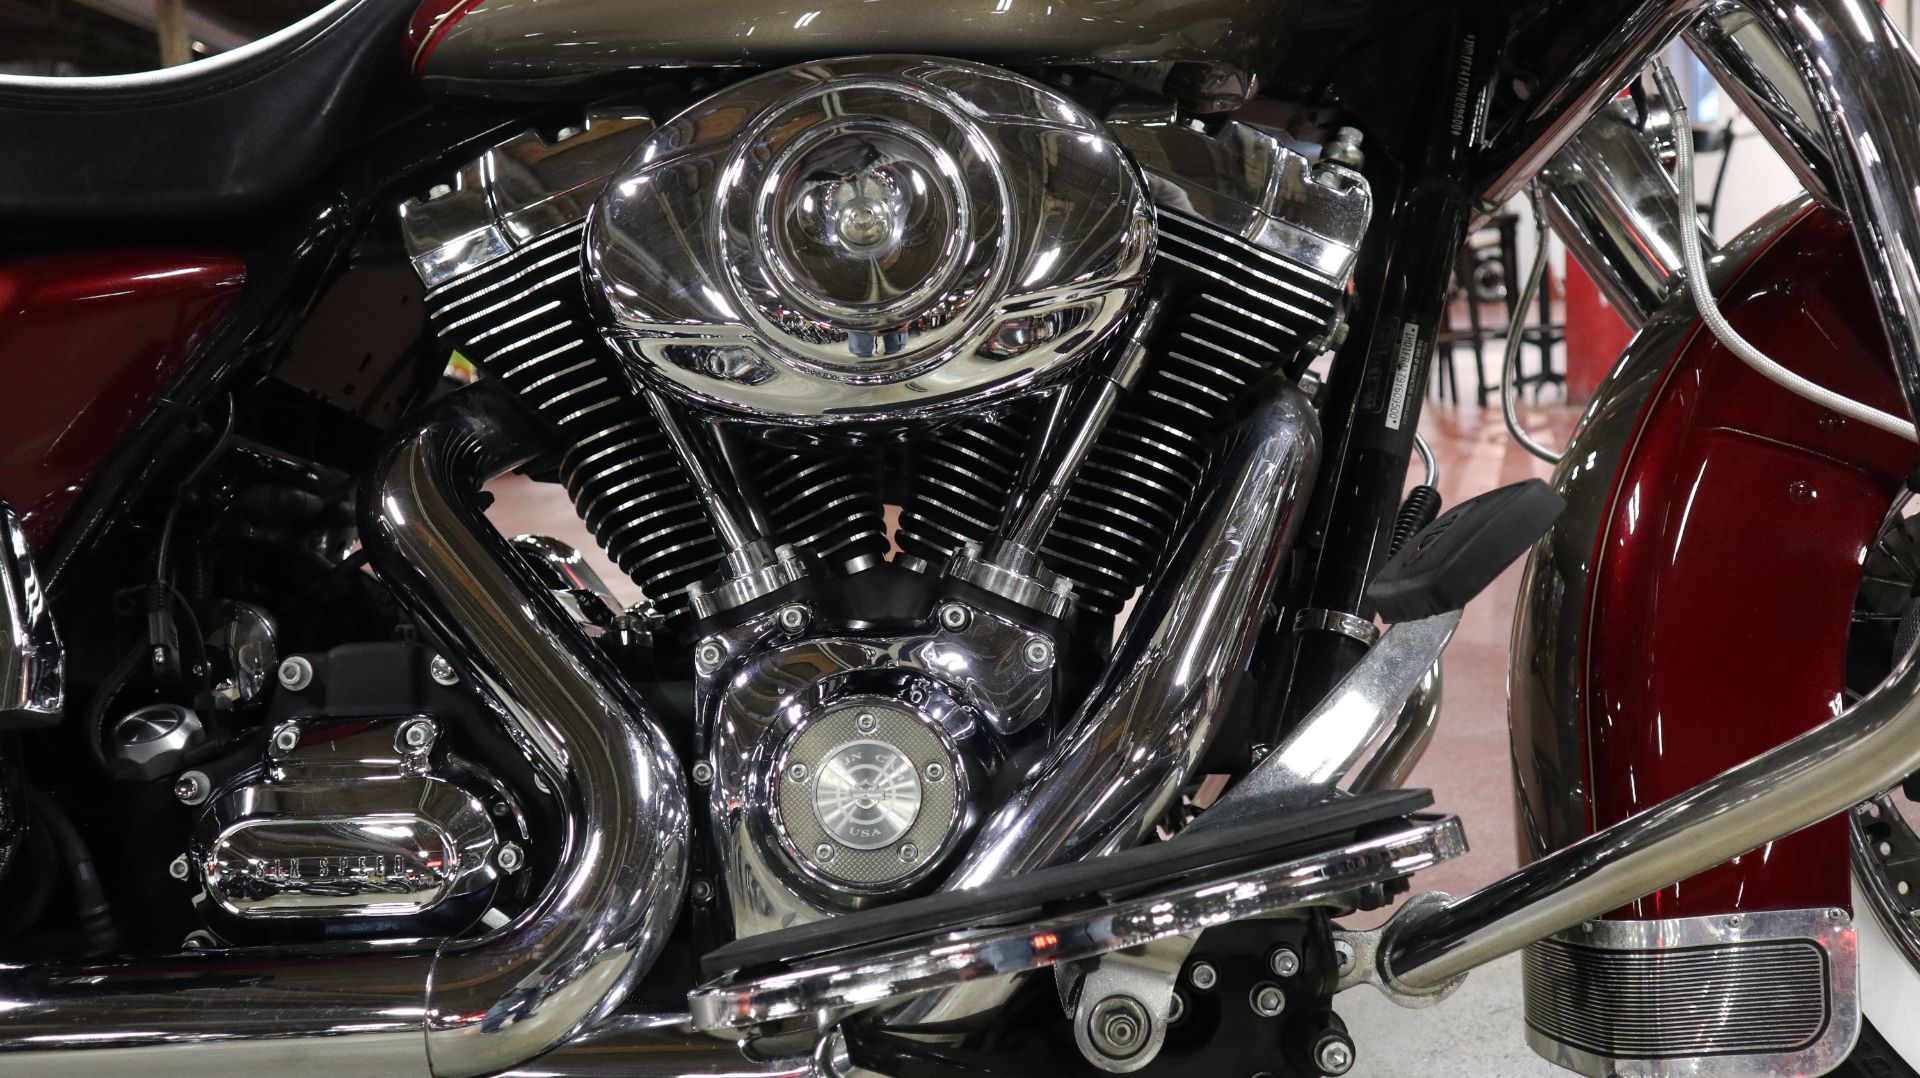 2009 Harley-Davidson Road King® Classic in New London, Connecticut - Photo 15